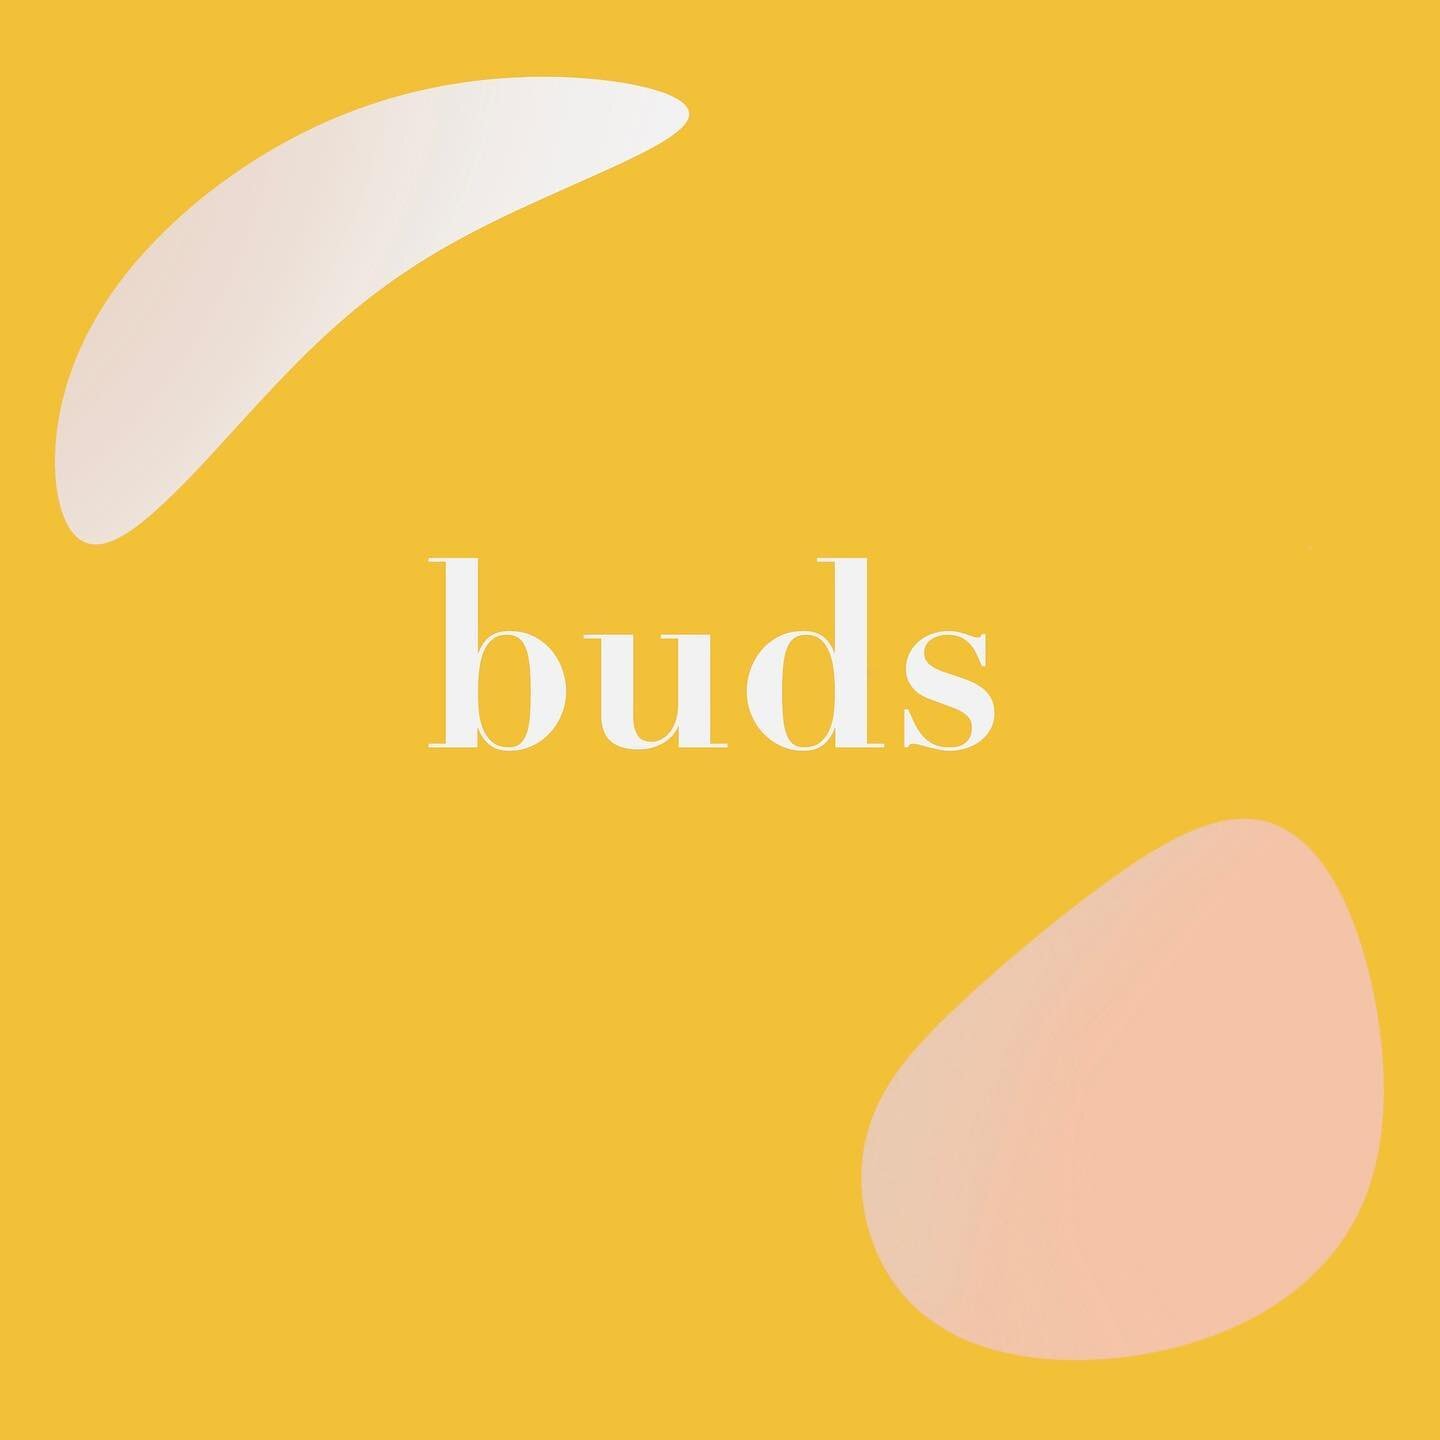 Inspired by: buds! That includes both new growth and also that I'm going to be seeing friends soon for the first time in a long time. These are some of my favorite new growth inspirations: from live walls of moss (if I had to choose just one, moss is